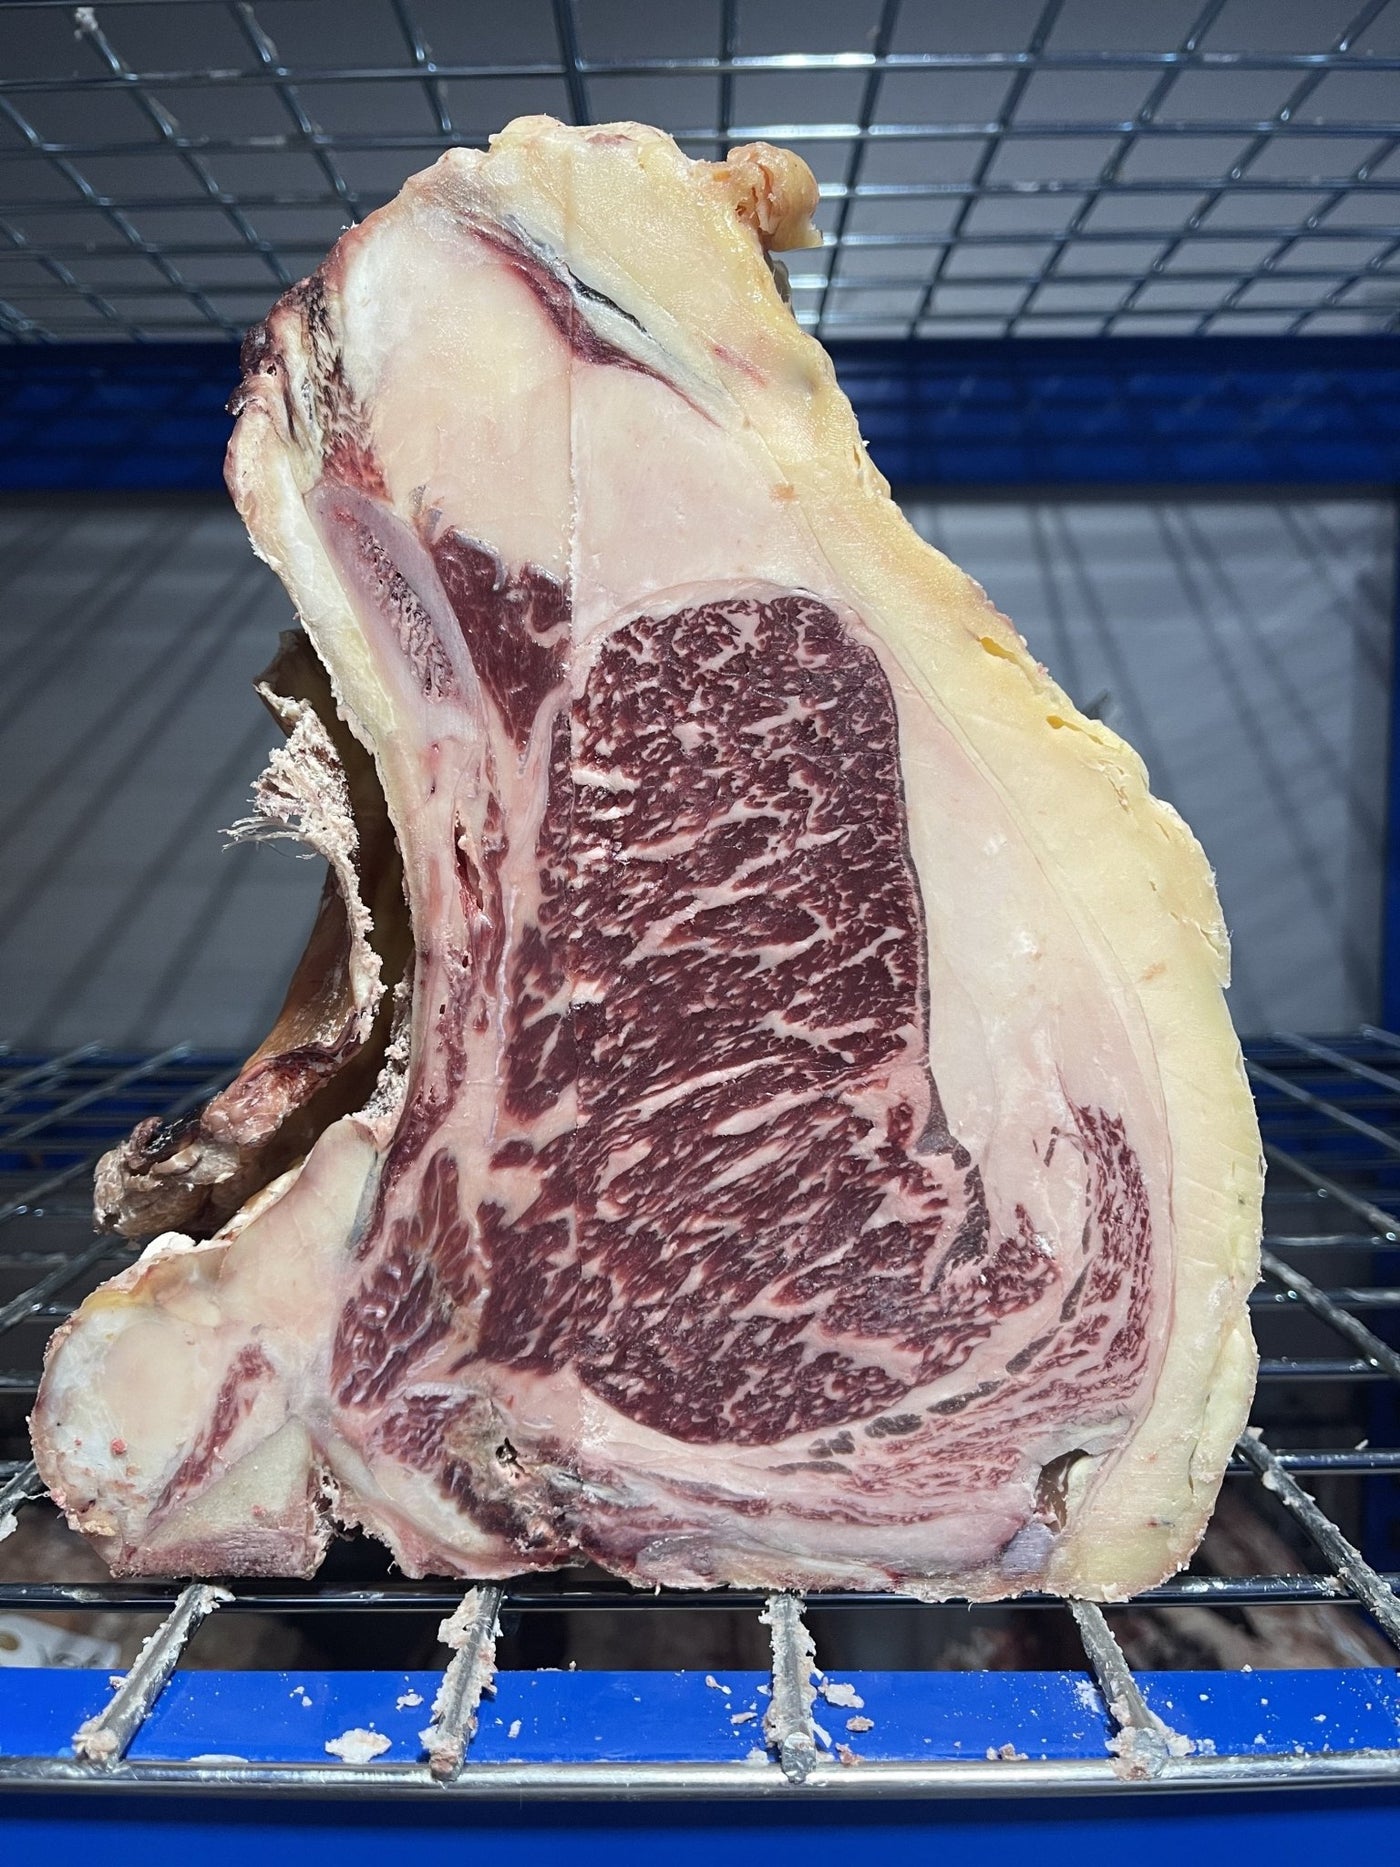 50 Day Dry-Aged Limousin Cross Sirloin On The Bone - Thomas Joseph Butchery - Ethical Dry-Aged Meat The Best Steak UK Thomas Joseph Butchery